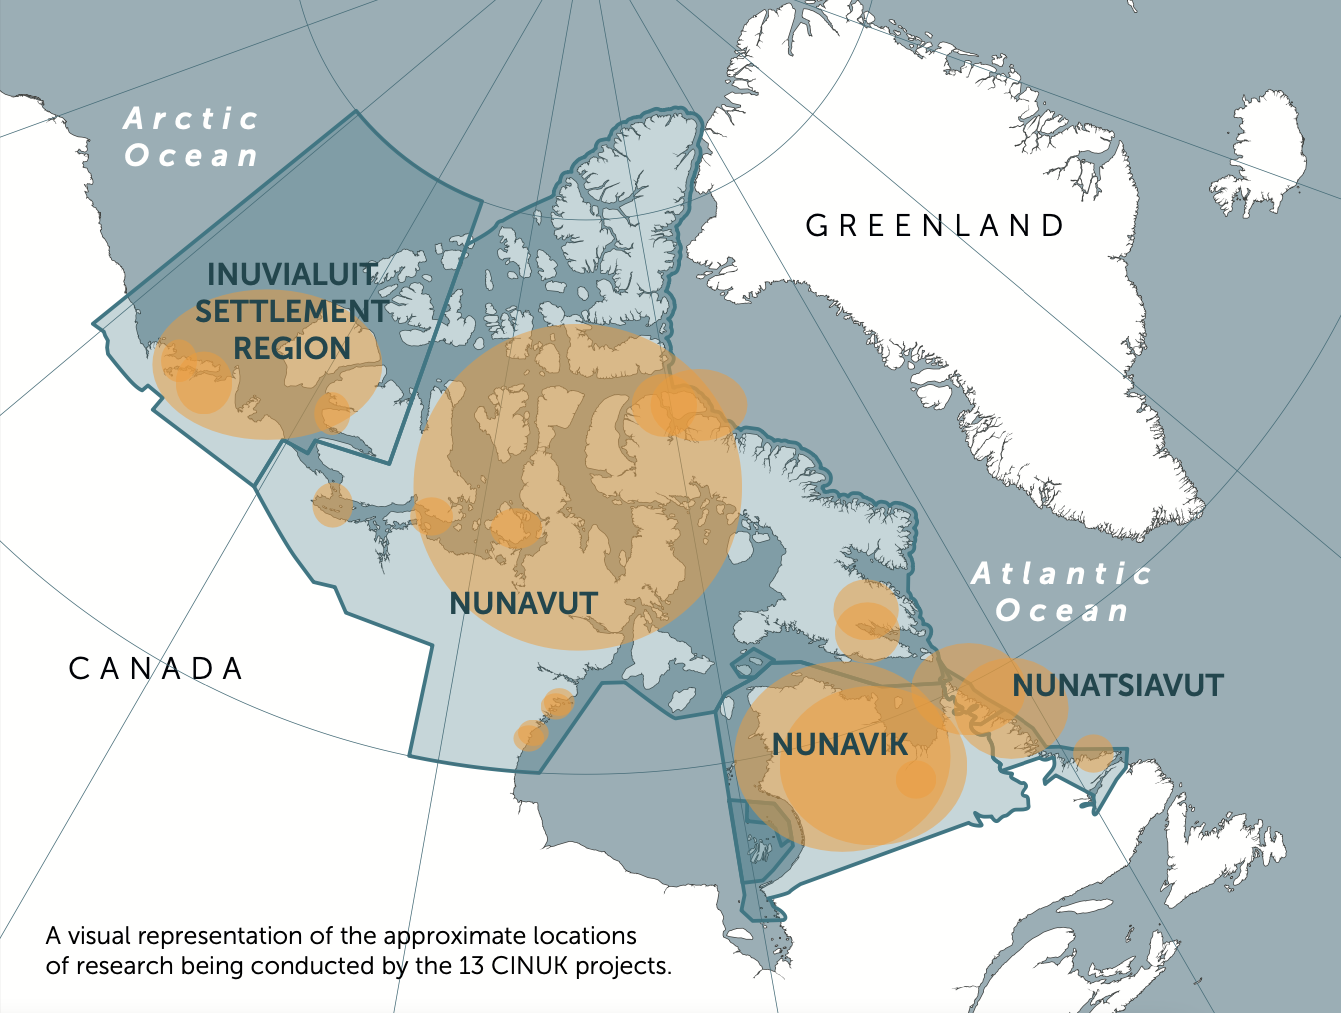 A visual representation of the approximate locations of research being conducted by the 13 CINUK projects, including Inuvialuit settlement region, Nunavut, Nunavik and Nunatsiavut. 